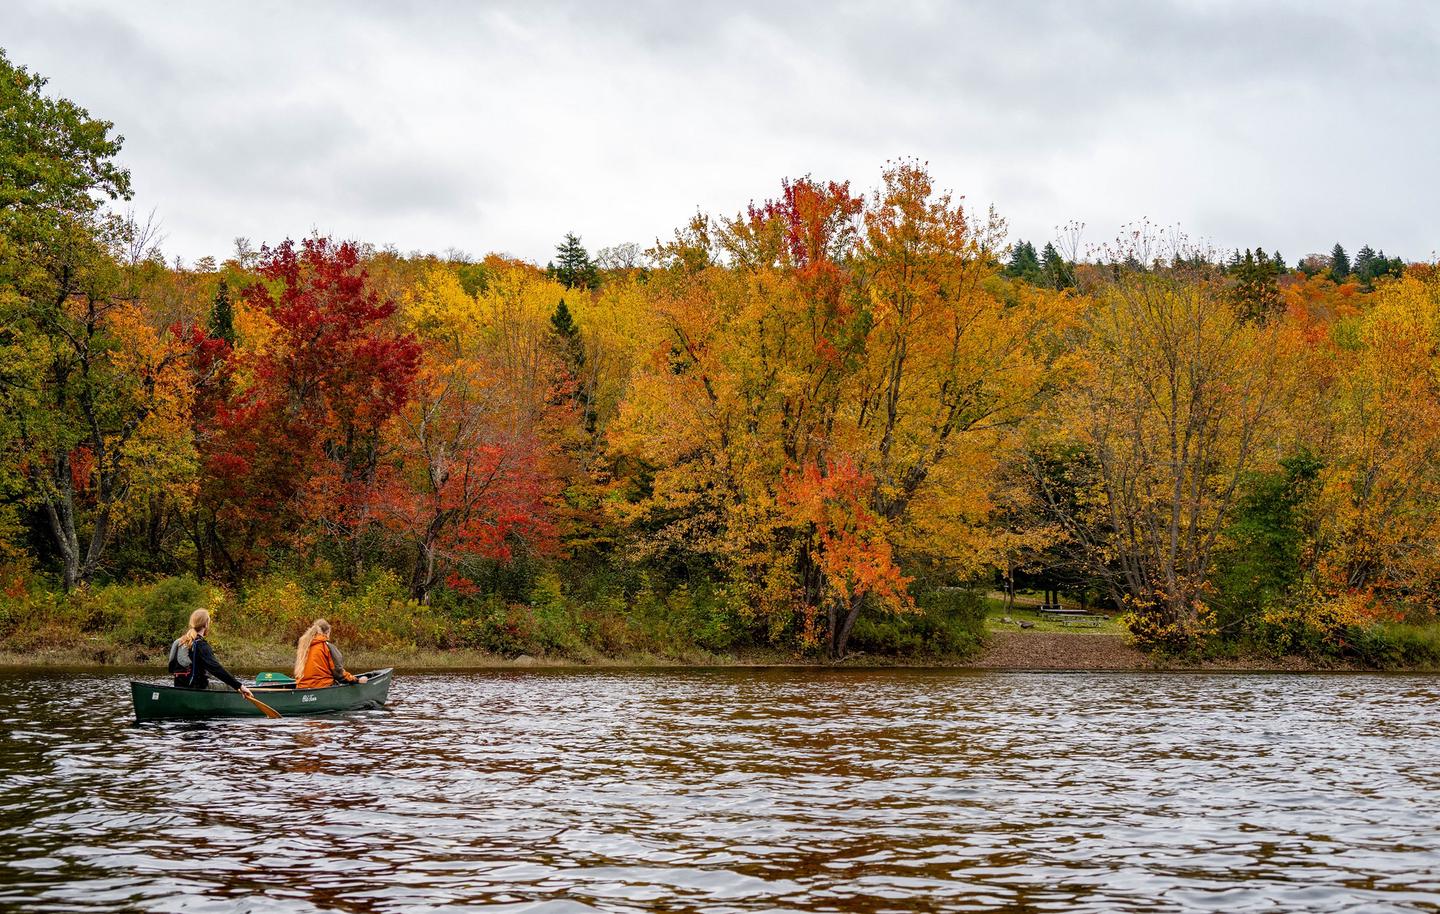 A view from the river facing the land. A canoe with two paddlers paddle towards a forest with vibrant red and yellow leaves on the canopies of the trees.Lunksoos Campground is located near the East Branch of the Penobscot River. Enjoy the scenic views it has to offer.